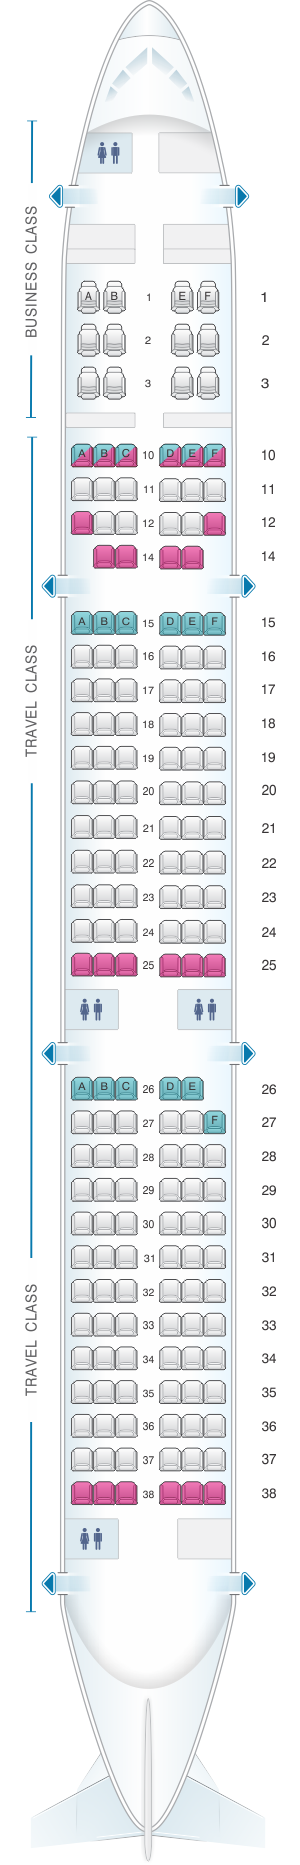 Seat Map Asiana Airlines Airbus A321 200 177PAX | SeatMaestro